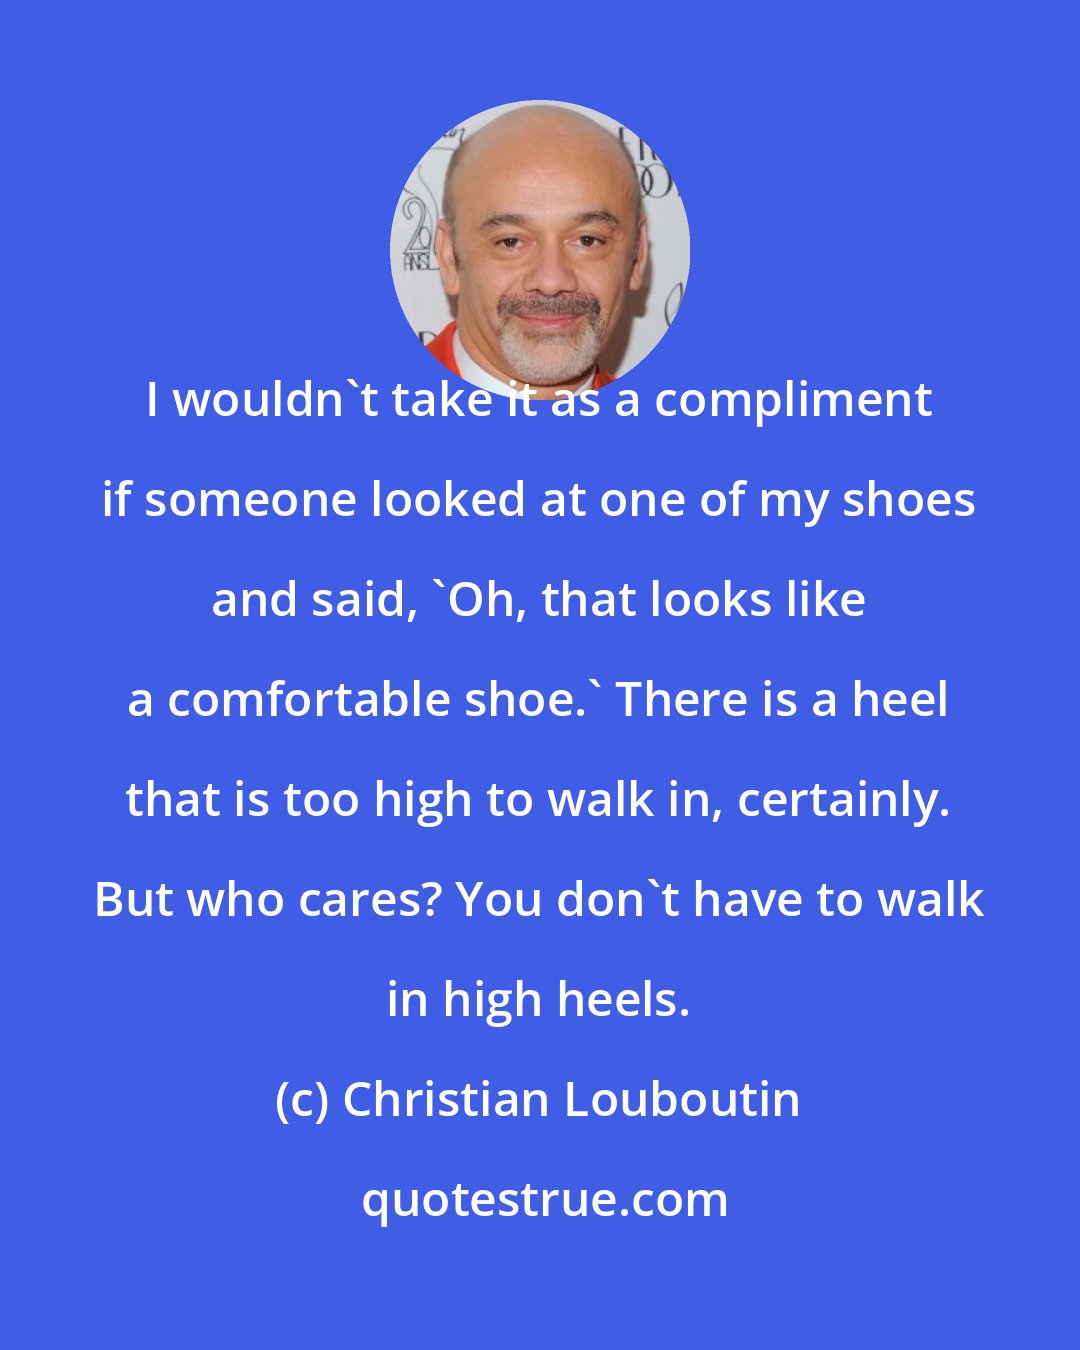 Christian Louboutin: I wouldn't take it as a compliment if someone looked at one of my shoes and said, 'Oh, that looks like a comfortable shoe.' There is a heel that is too high to walk in, certainly. But who cares? You don't have to walk in high heels.